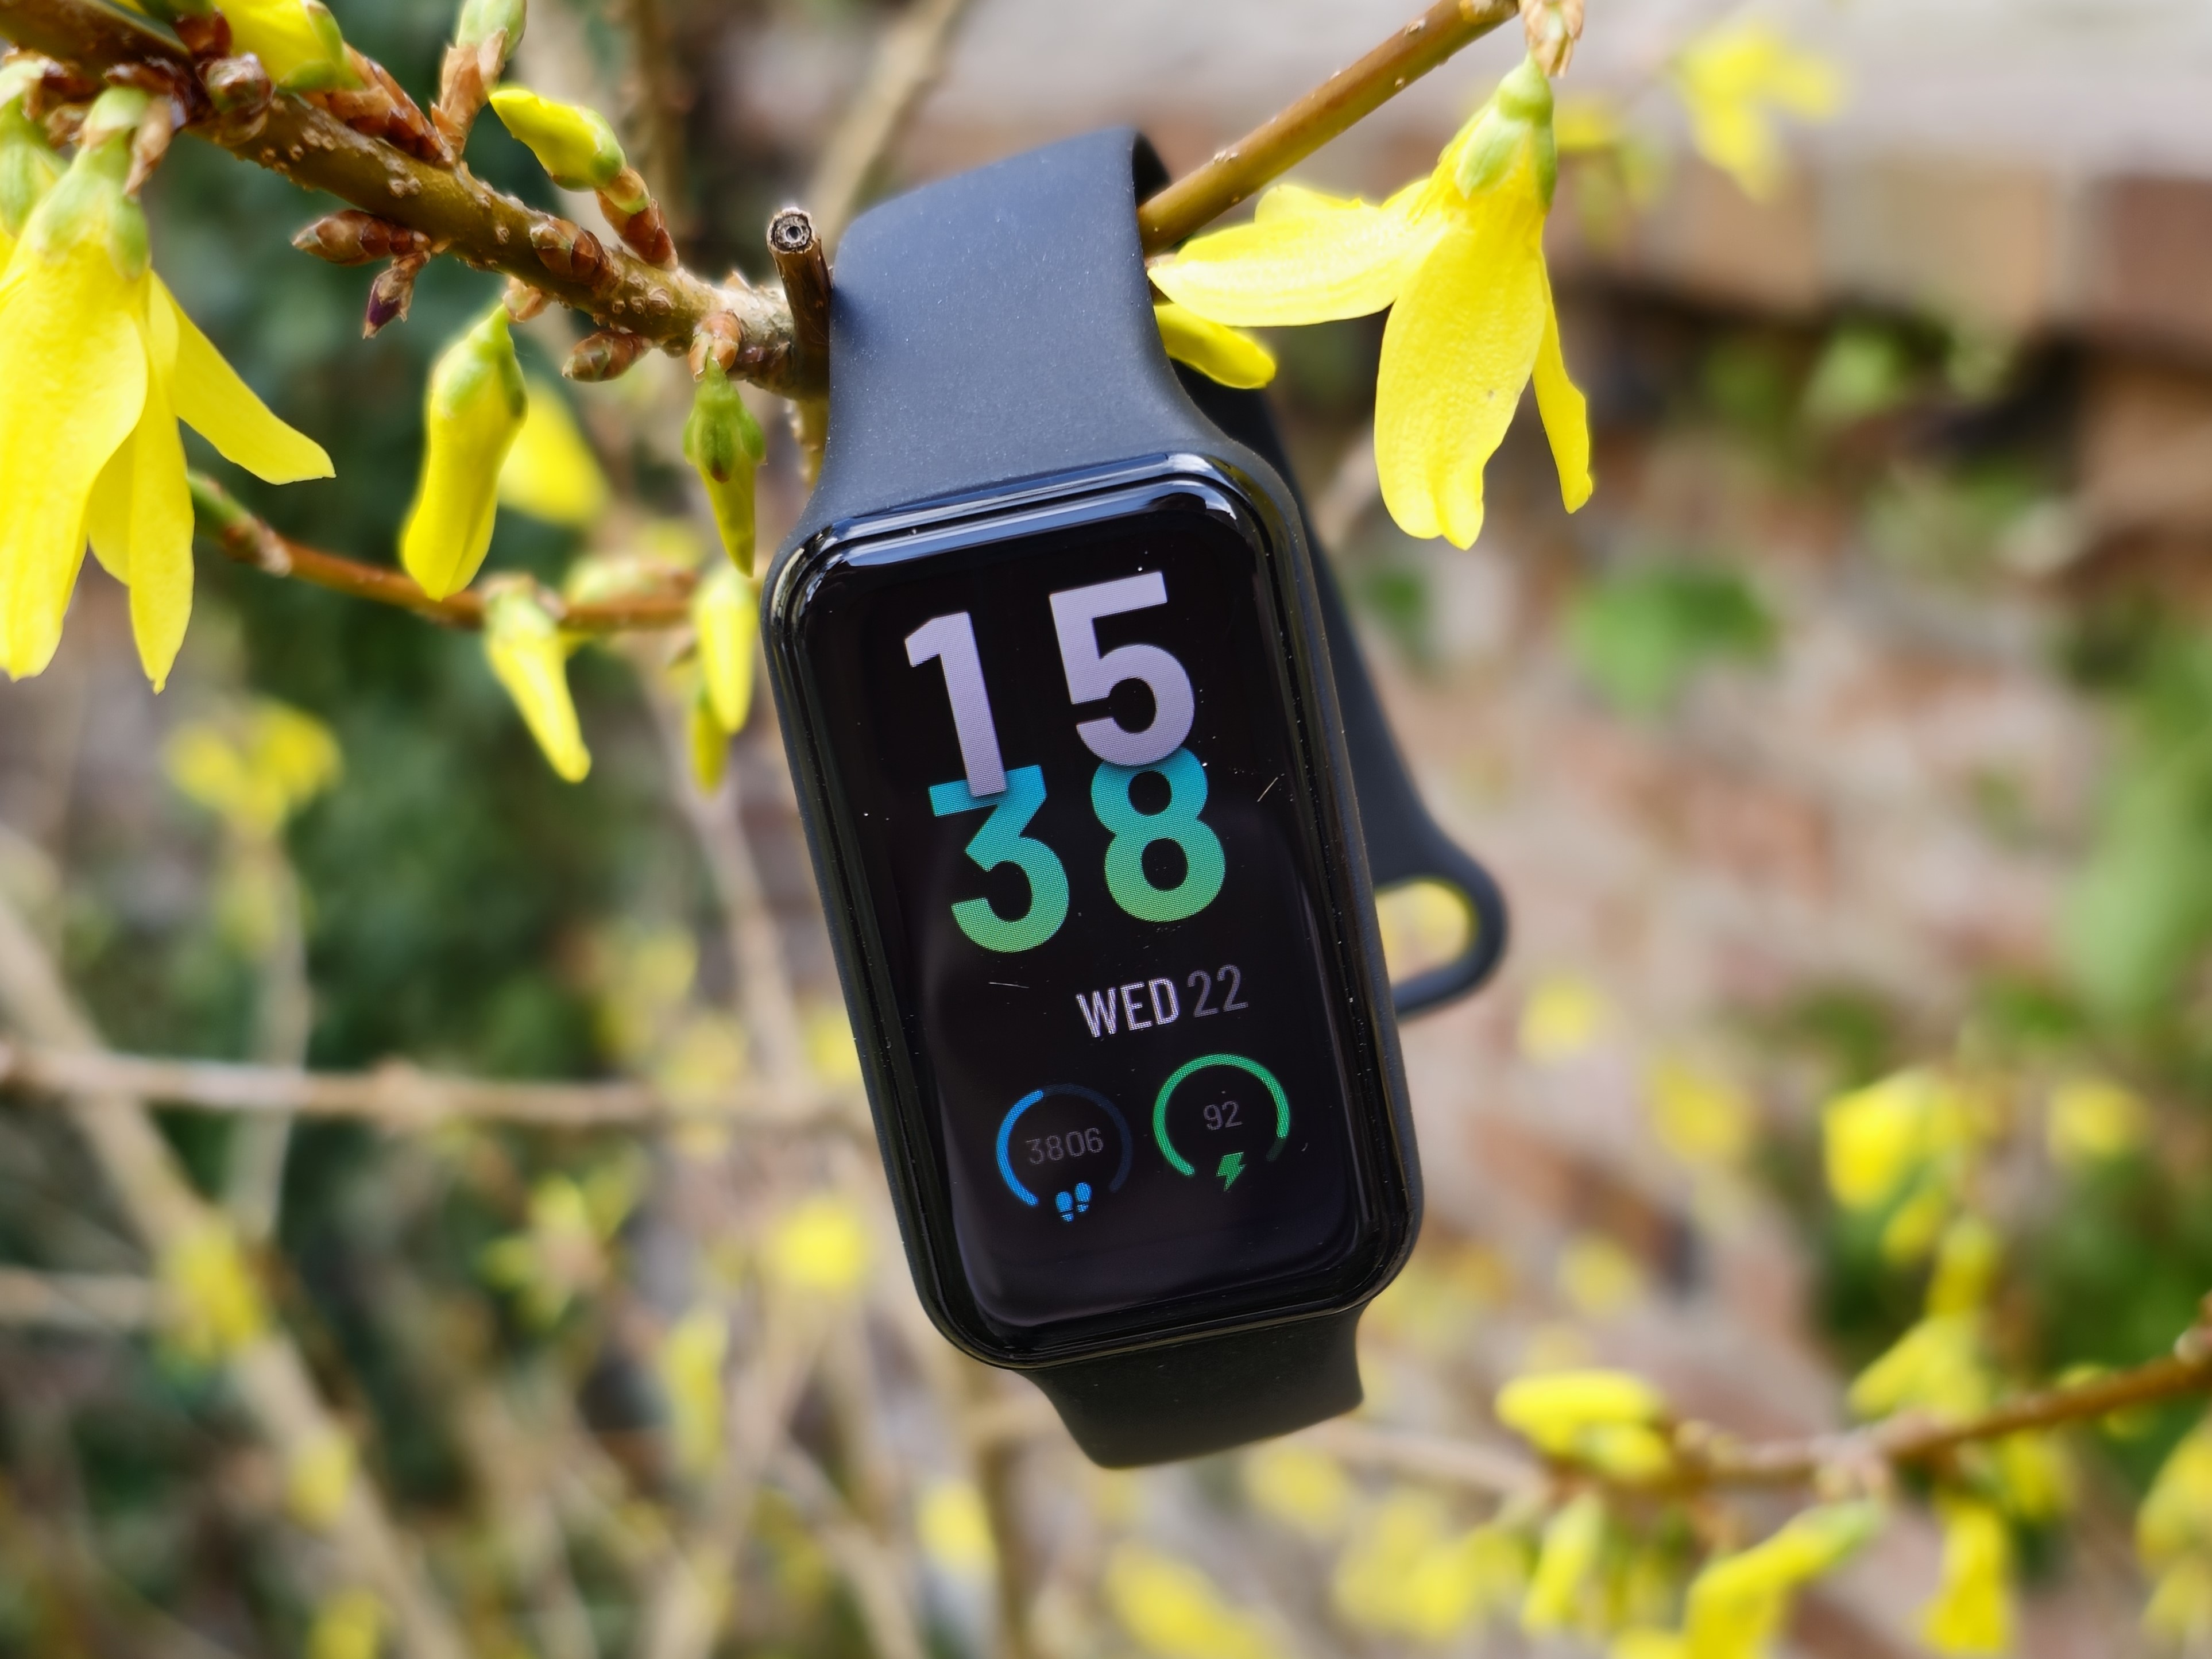 Amazfit Band 5: How to Master Factory Reset 